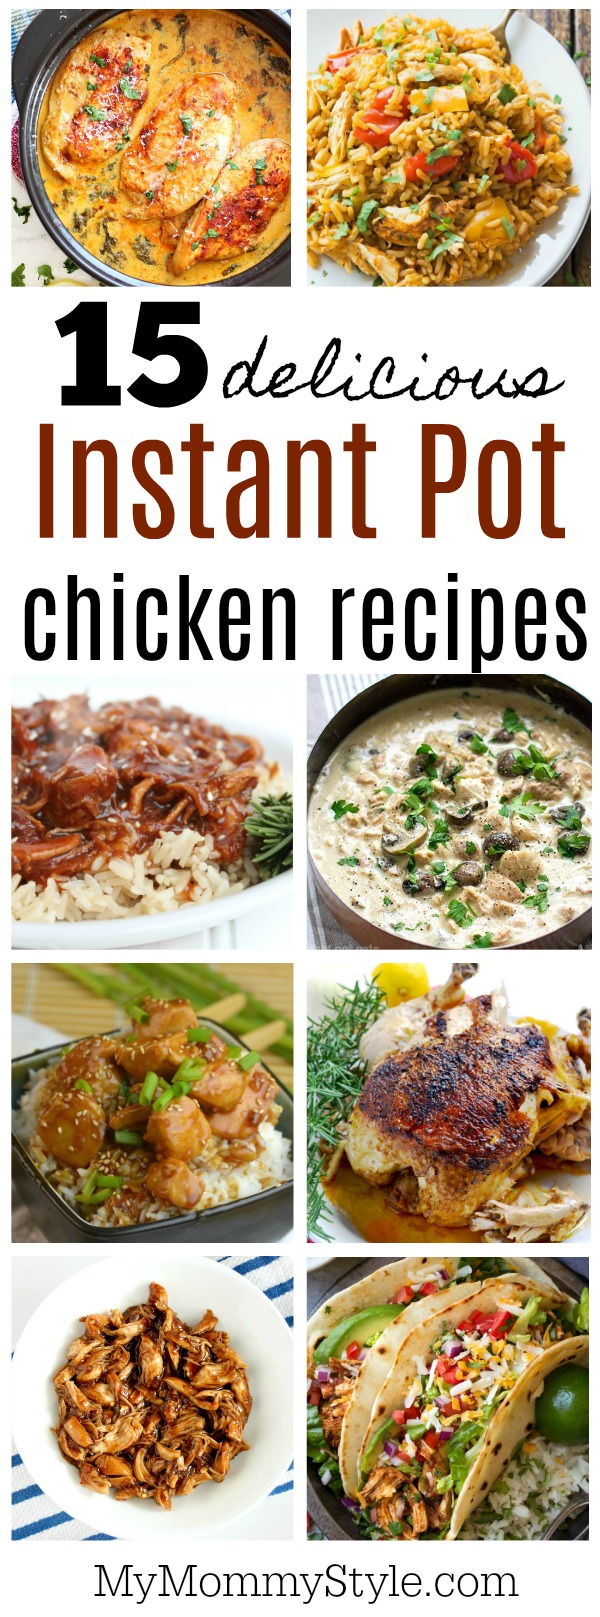 15 easy Instant Pot chicken recipes - My Mommy Style